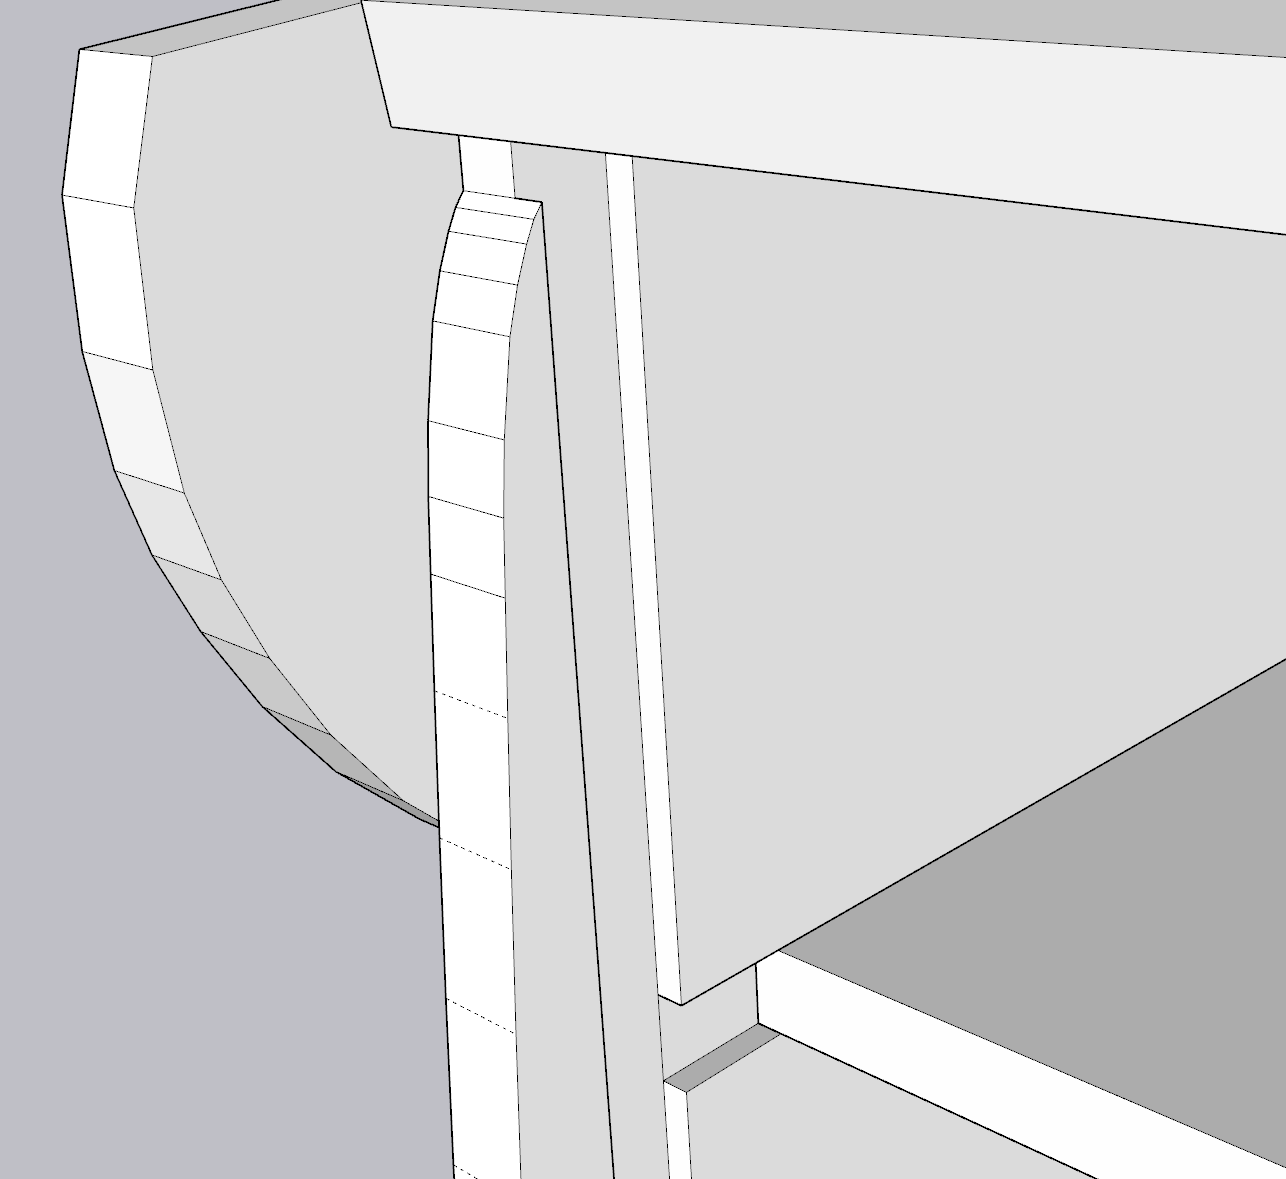 Building a Golden Tee Fore Cabinet: Part 1 - Idea and Design